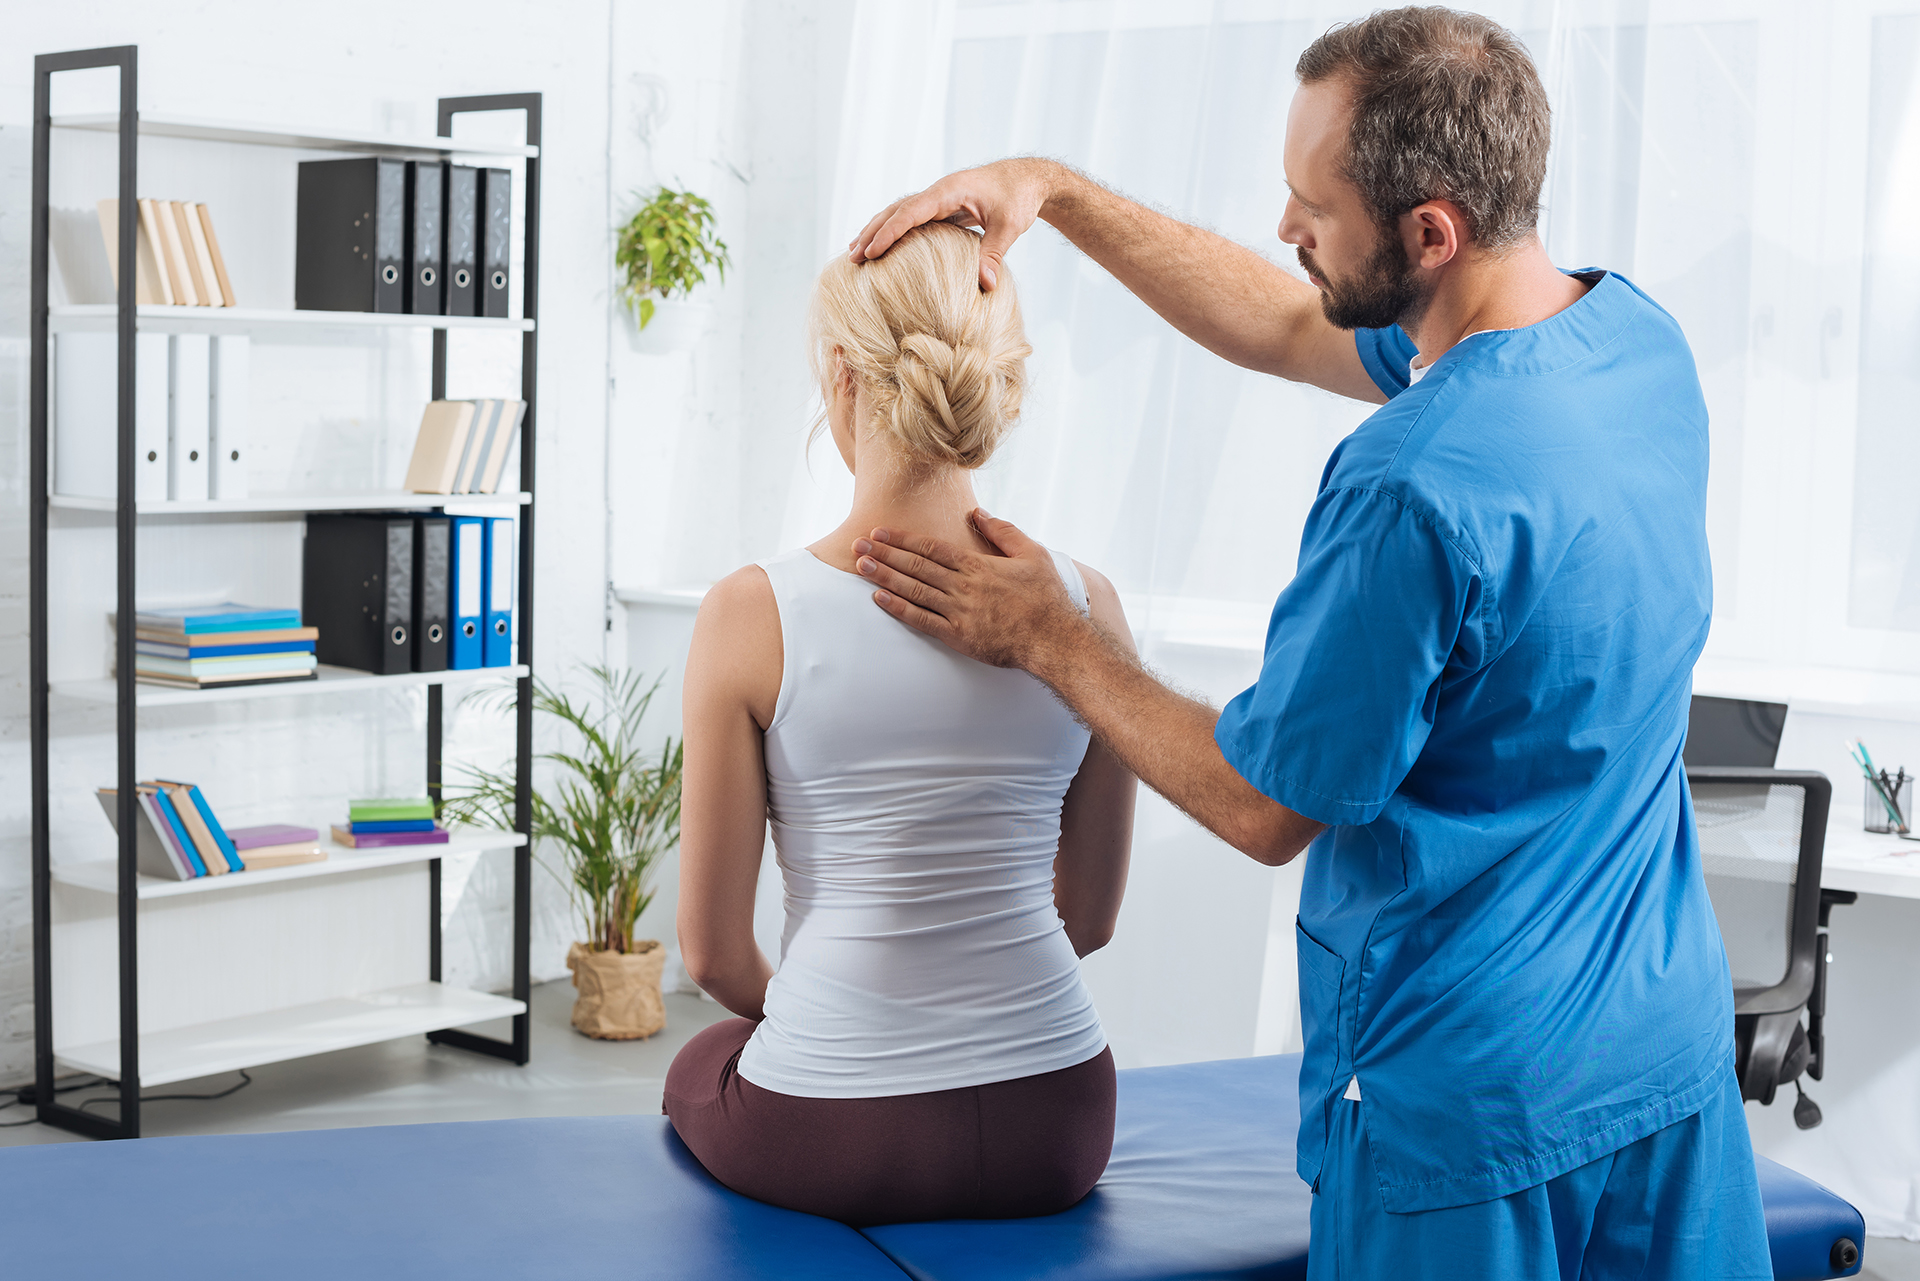 Professional Chiropractor assessing patient's neck and shoulders